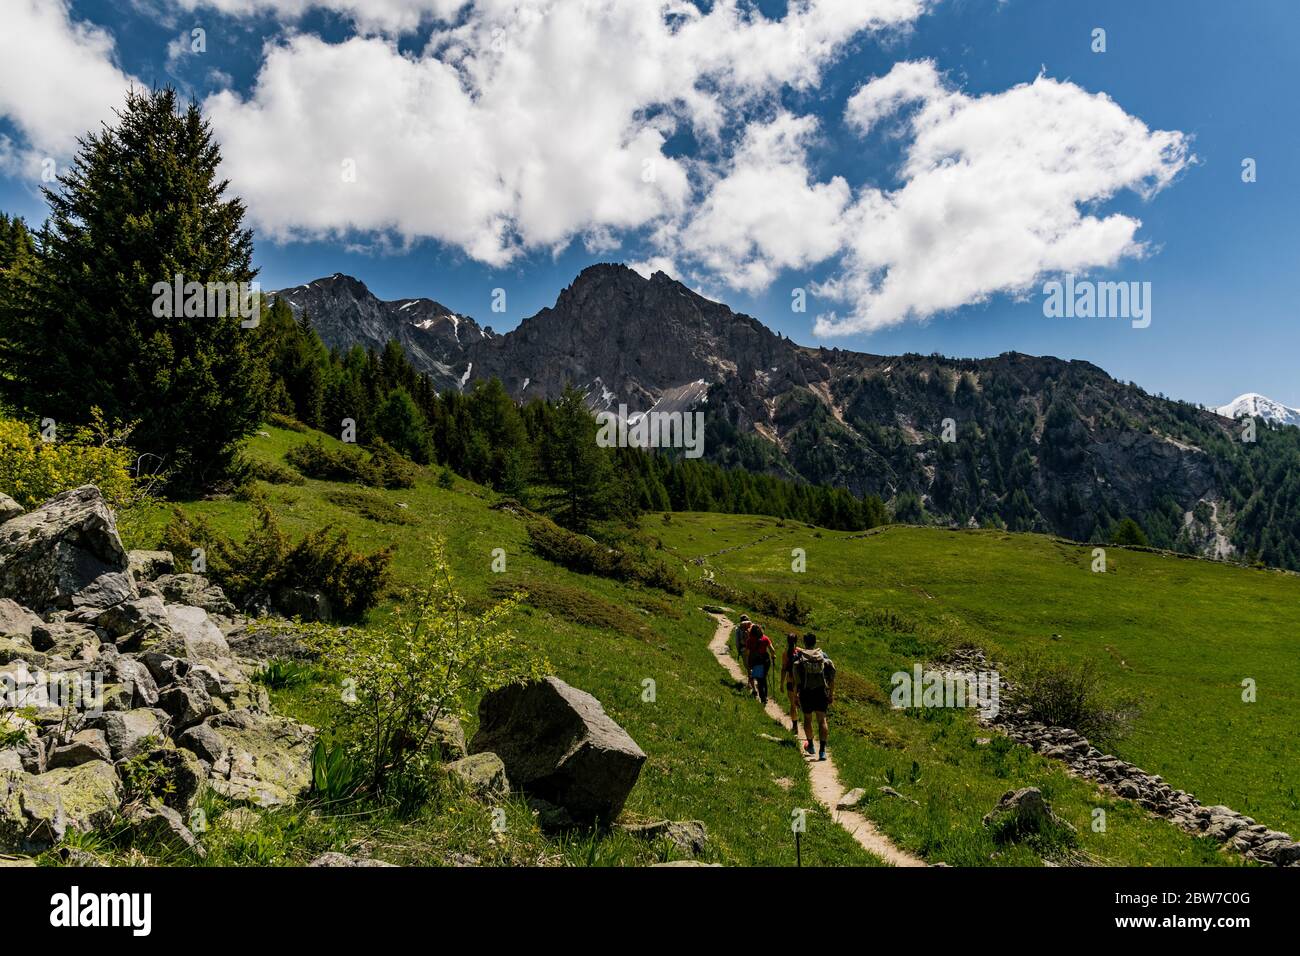 French Lifestyle, a group of local hikers in the French Alps. Stock Photo